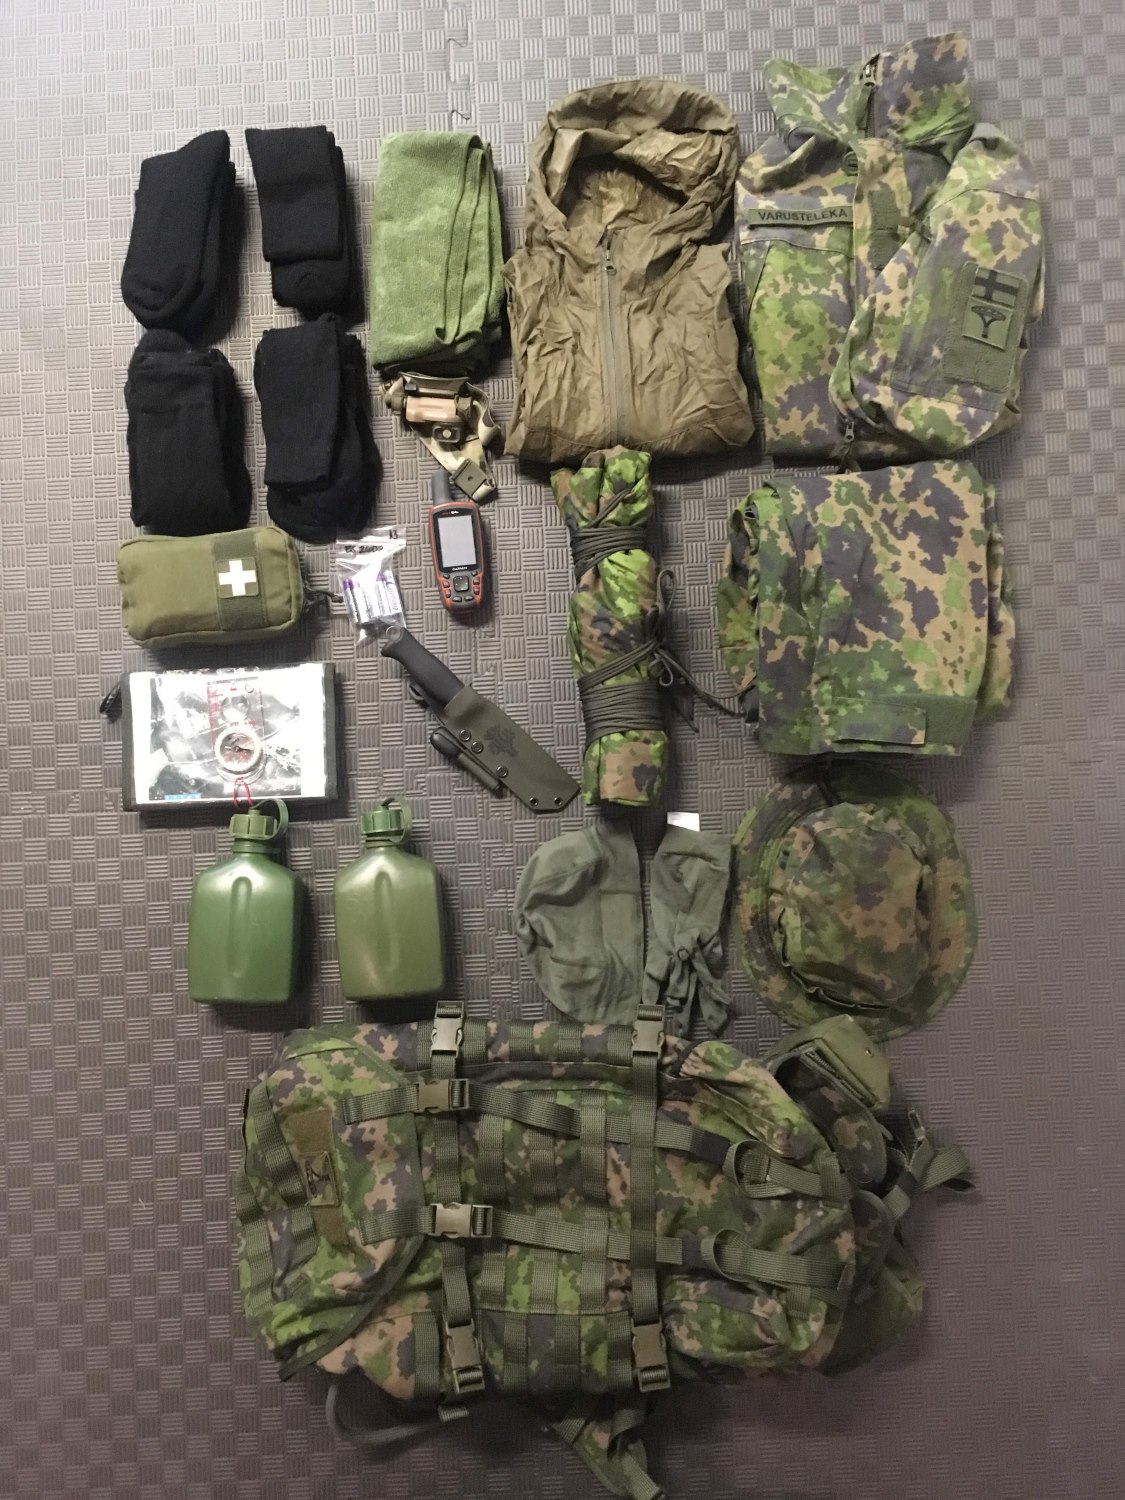 The gear as listed above.